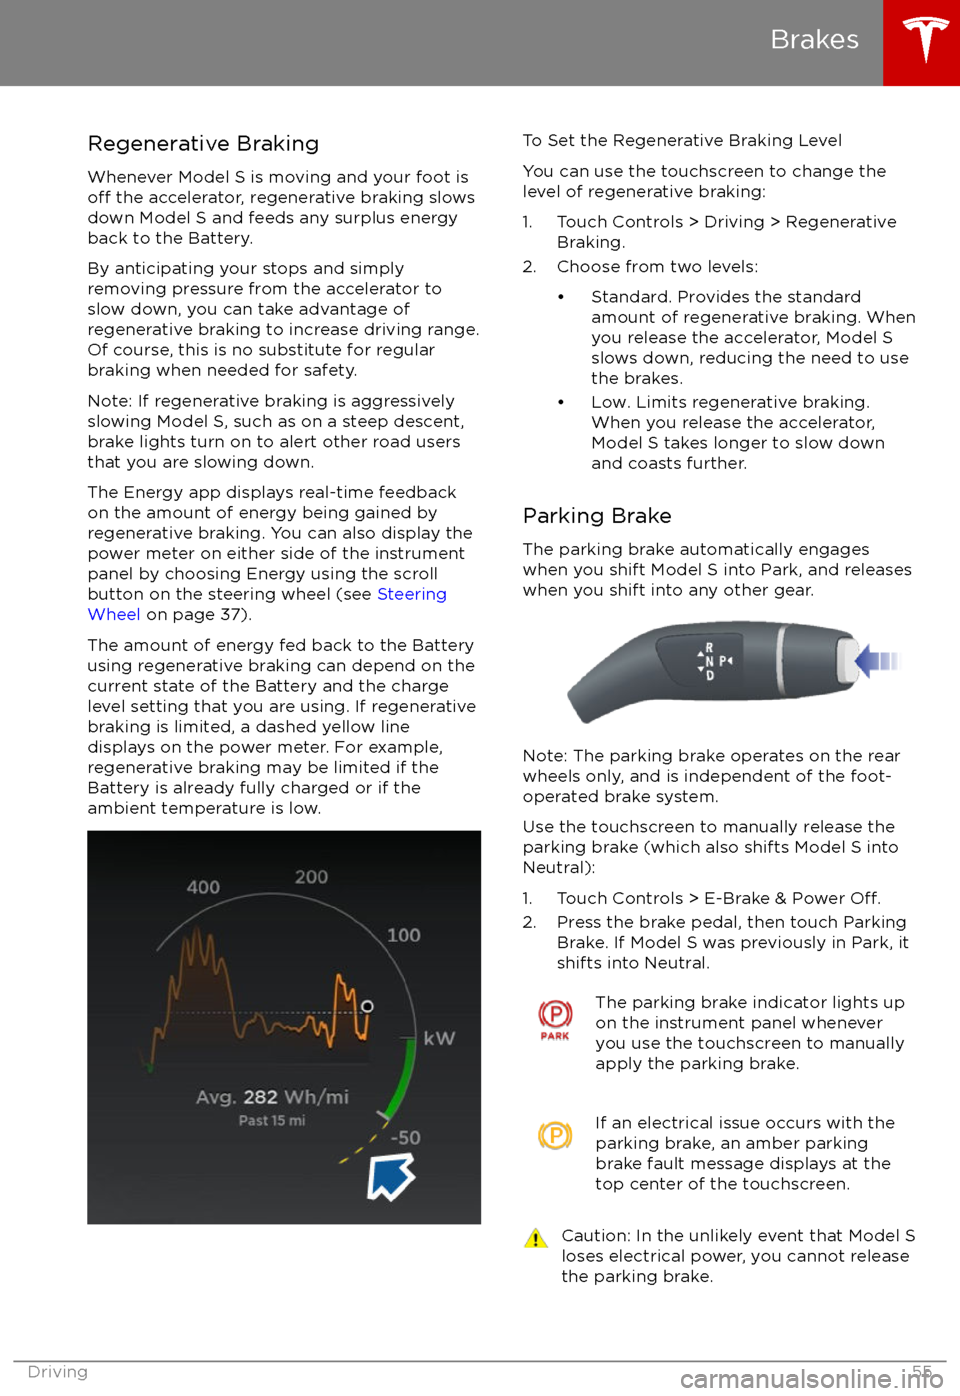 TESLA MODEL S 2017  Owners Manual Regenerative Braking
Whenever Model S is moving and your foot is
off the accelerator, regenerative braking slows
down Model S and feeds any surplus energy
back to the Battery.
By anticipating your sto